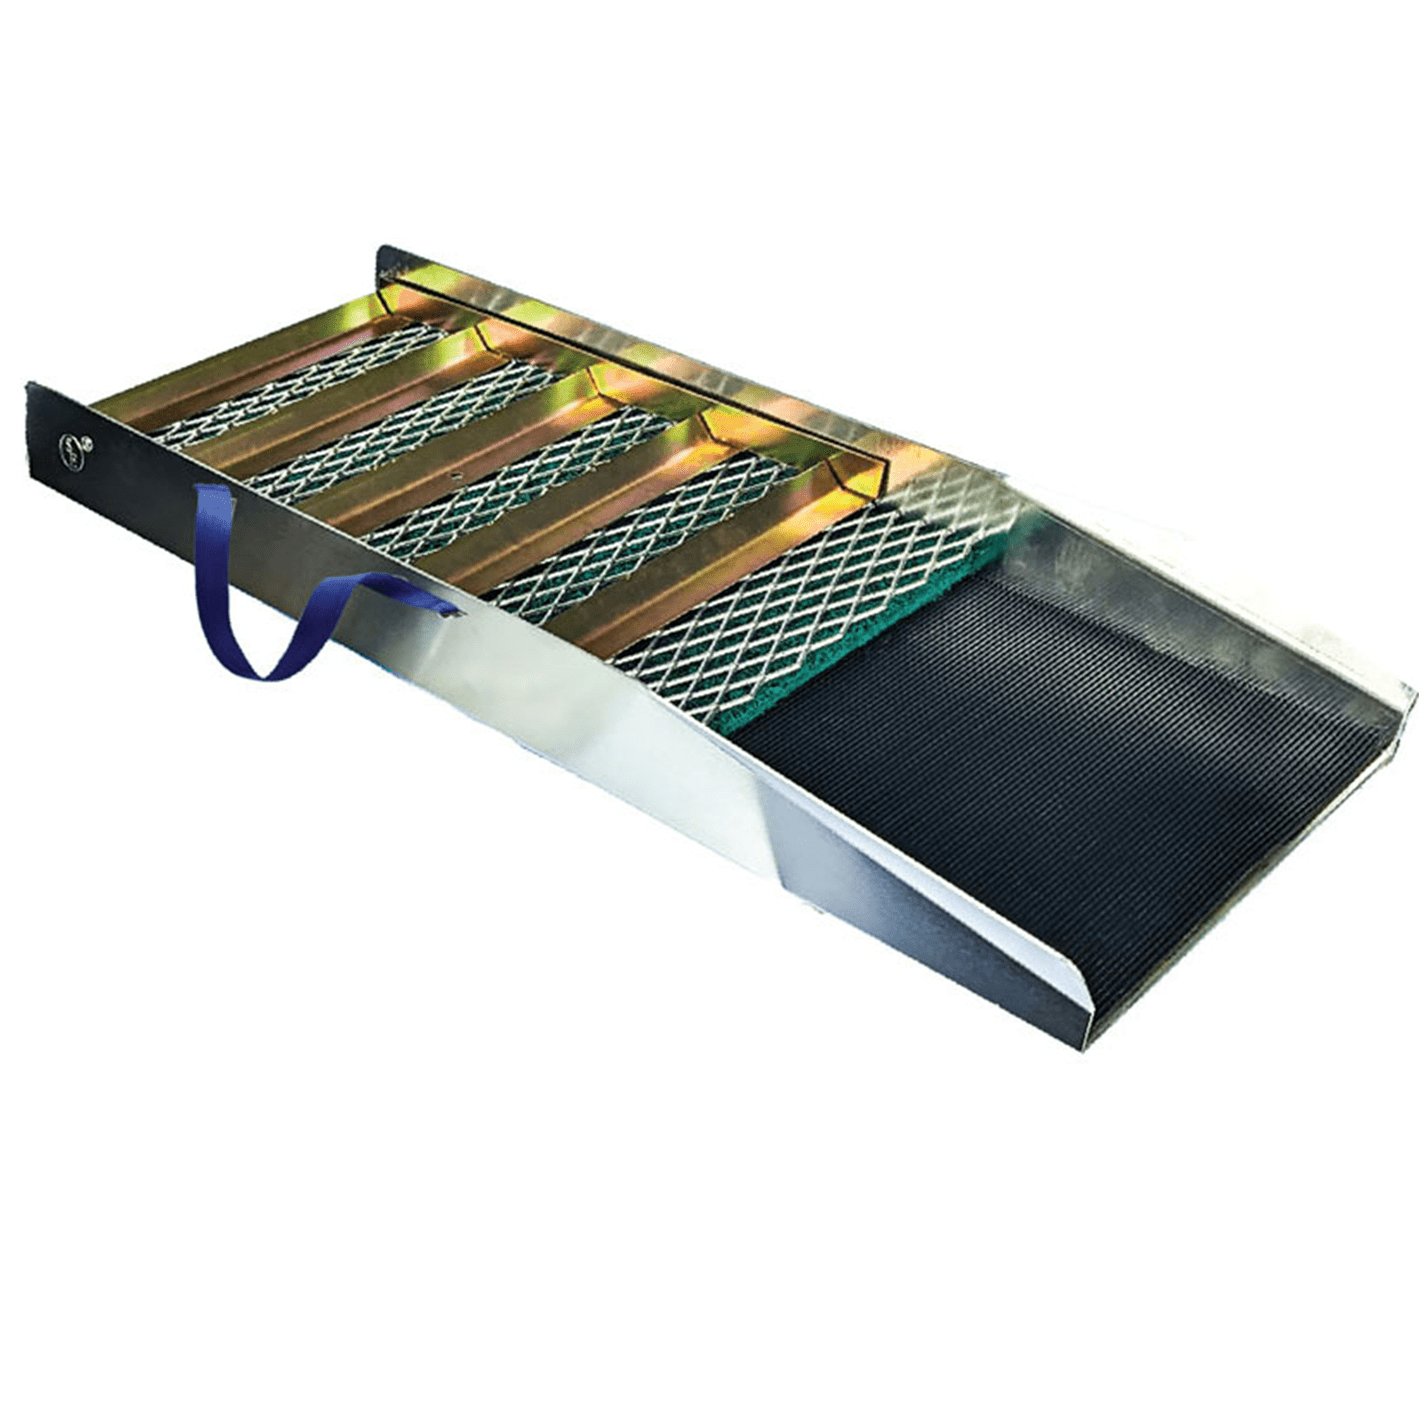 27" Sluice box with matting riffles and expanded metal